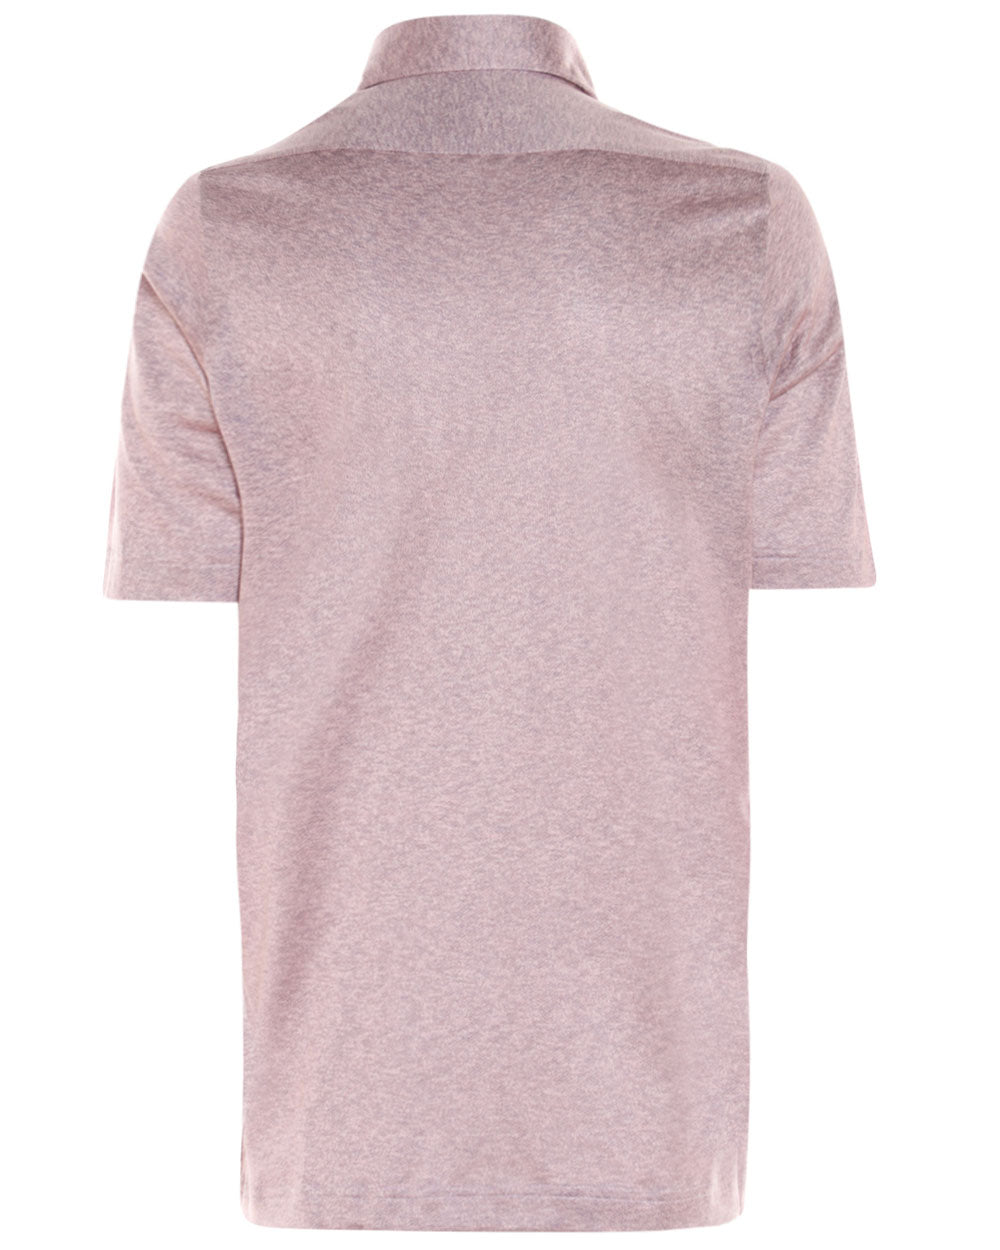 Pink Feathered Cotton Knit Short Sleeve Polo